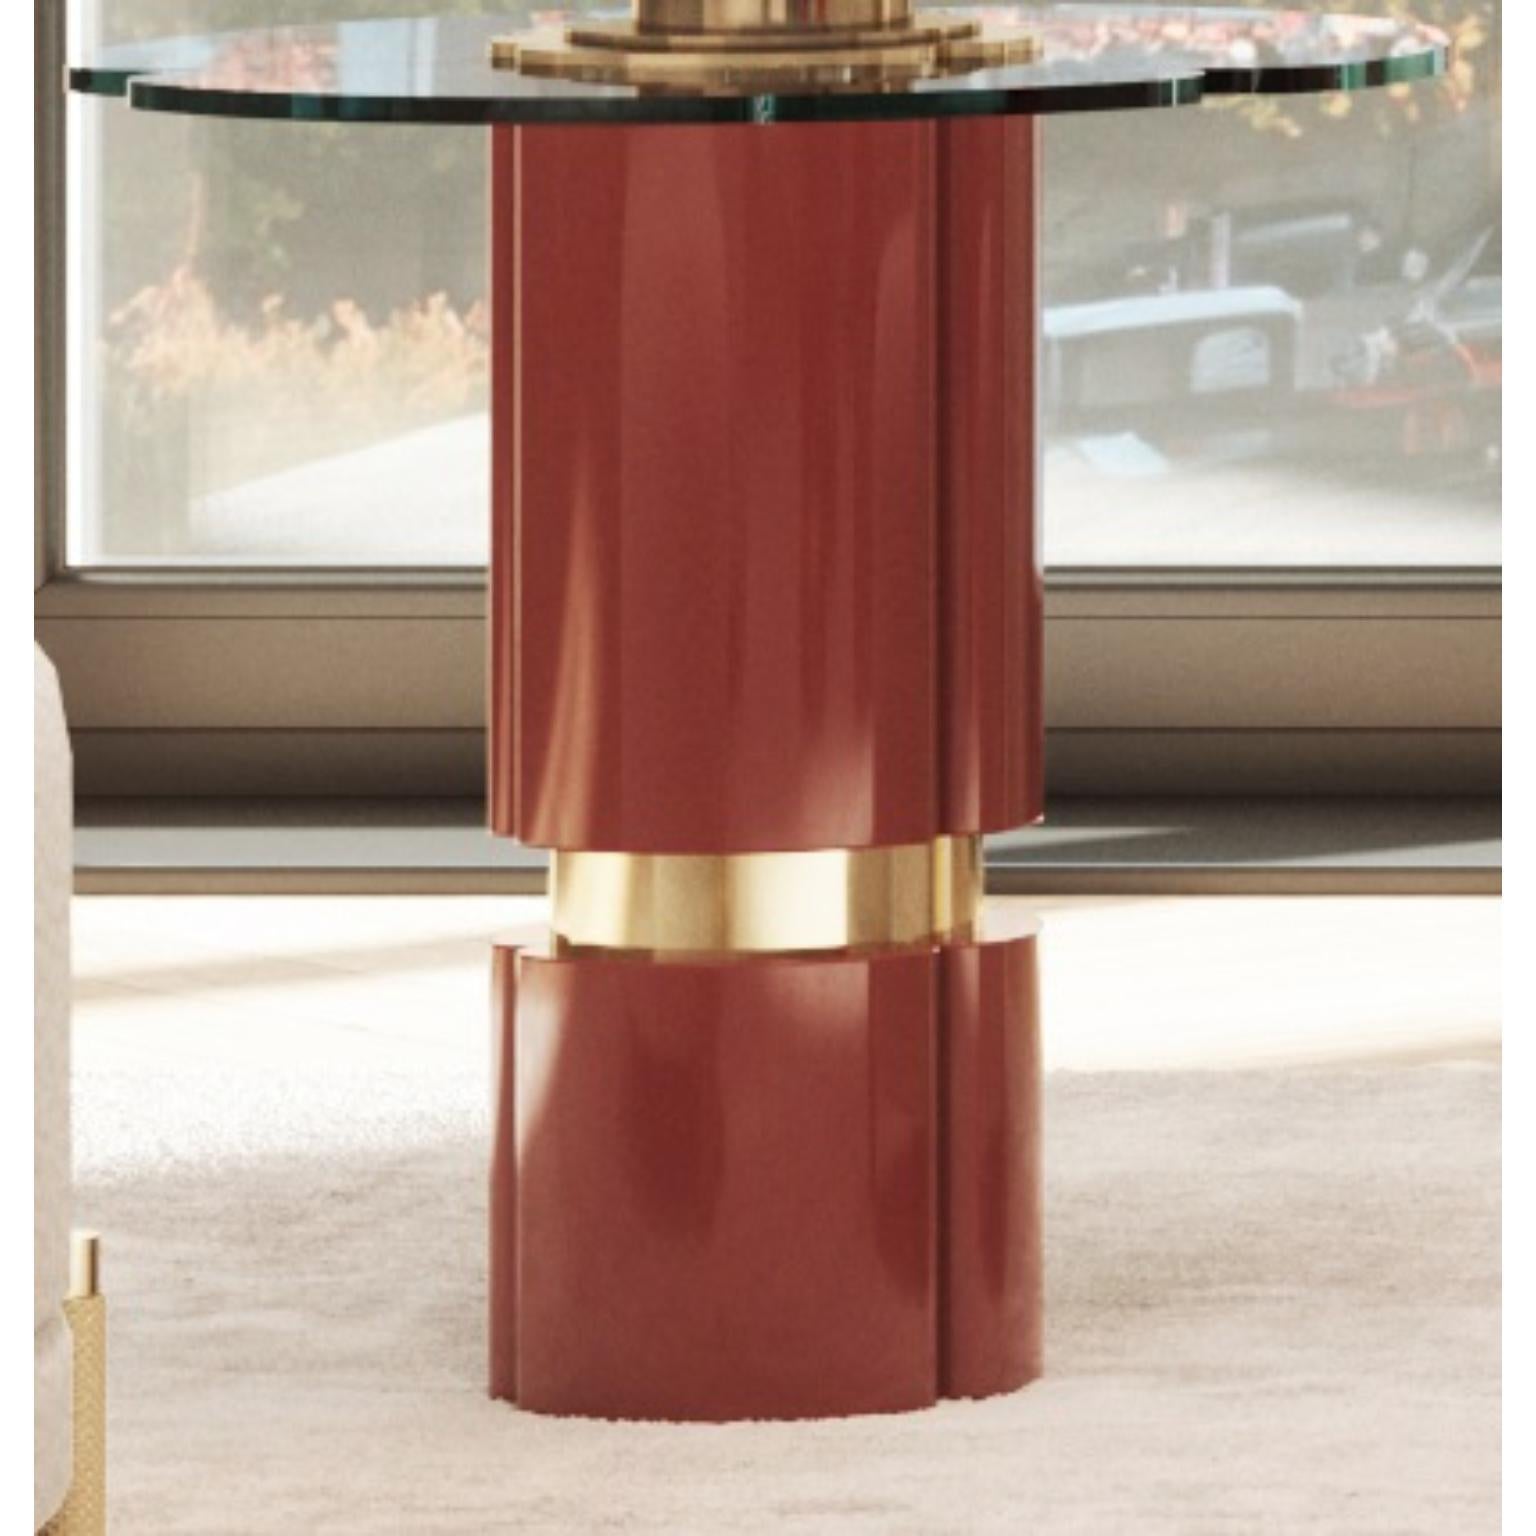 Euphoria Small Center Table by Memoir Essence
Dimensions: D 50 x W 50 x H 50 cm.
Materials: Polished brass, lacquer and glass.

Available in different sizes. Please contact us.

Memoir presents the new center table set Euphoria. Dynamic, and classy,